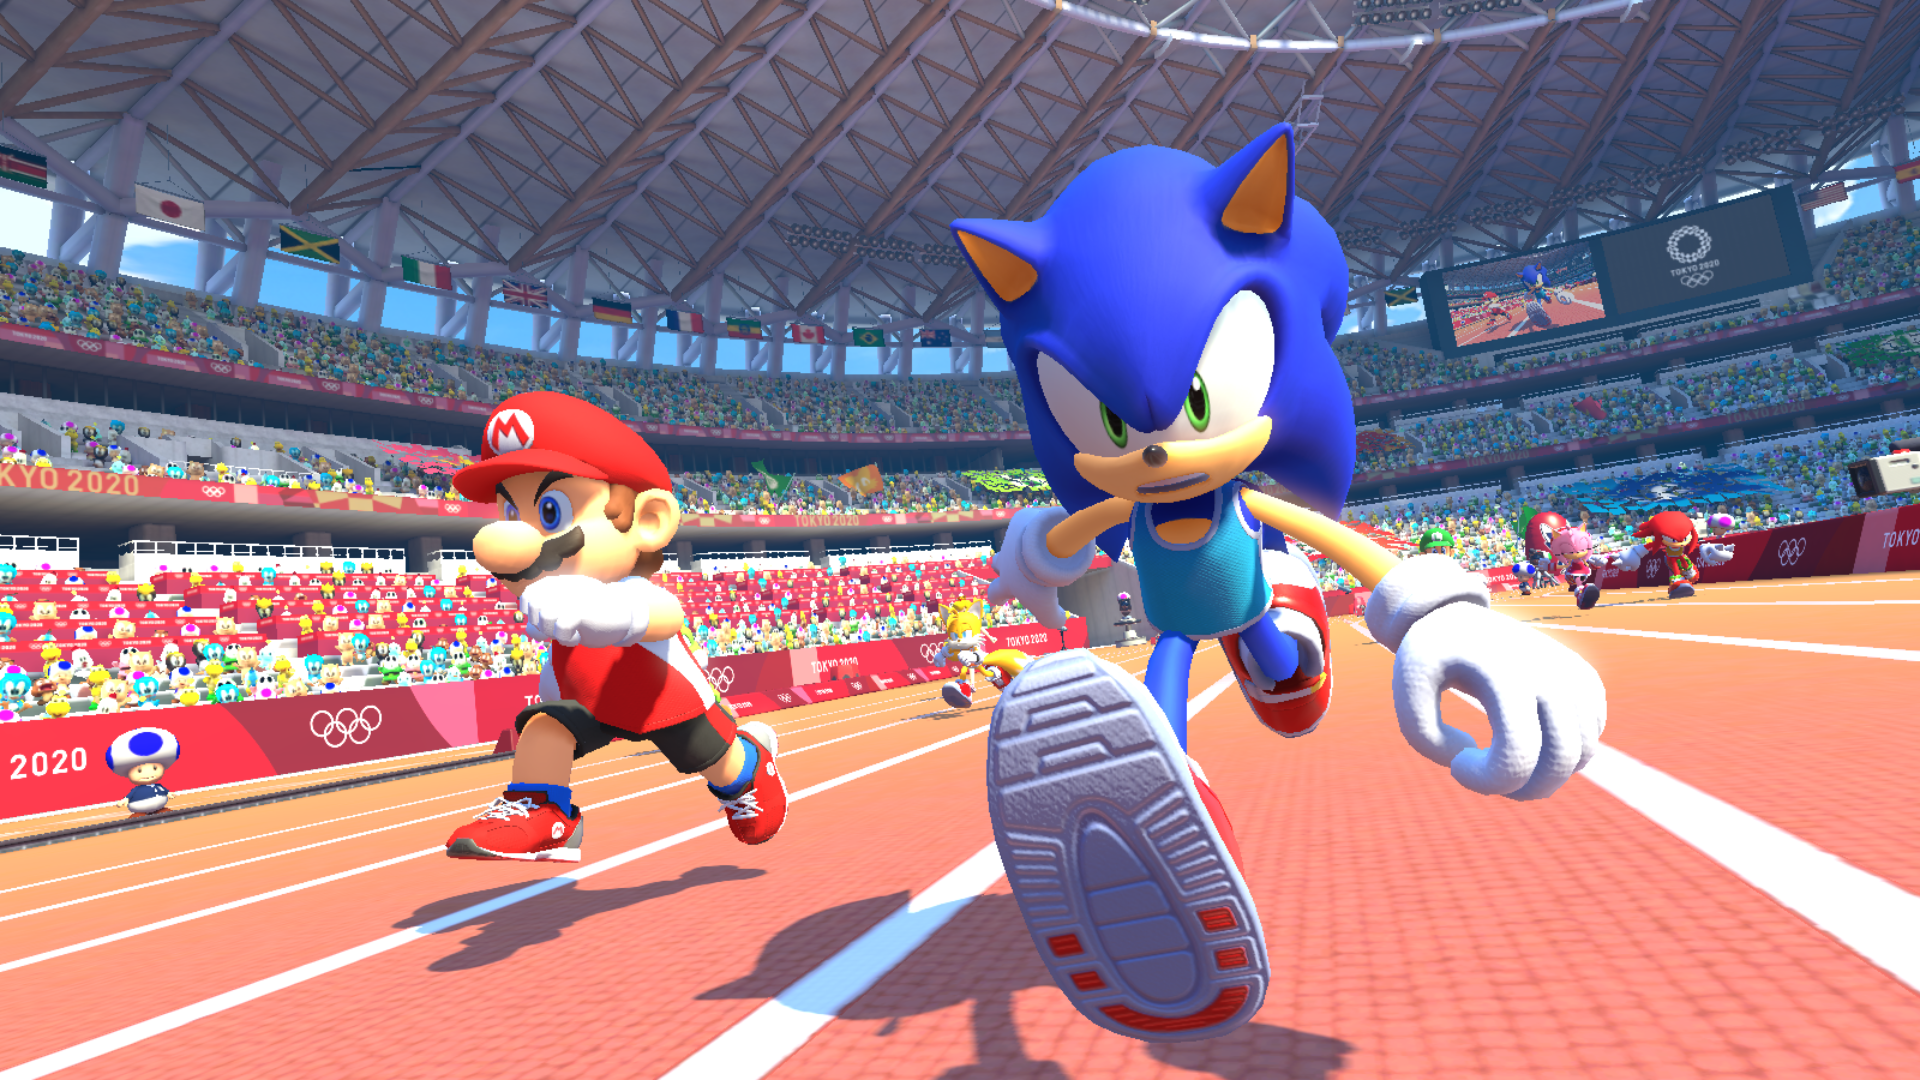 Mario & Sonic at the Olympic Games: Tokyo 2020 - Nintendo Switch - image 4 of 8